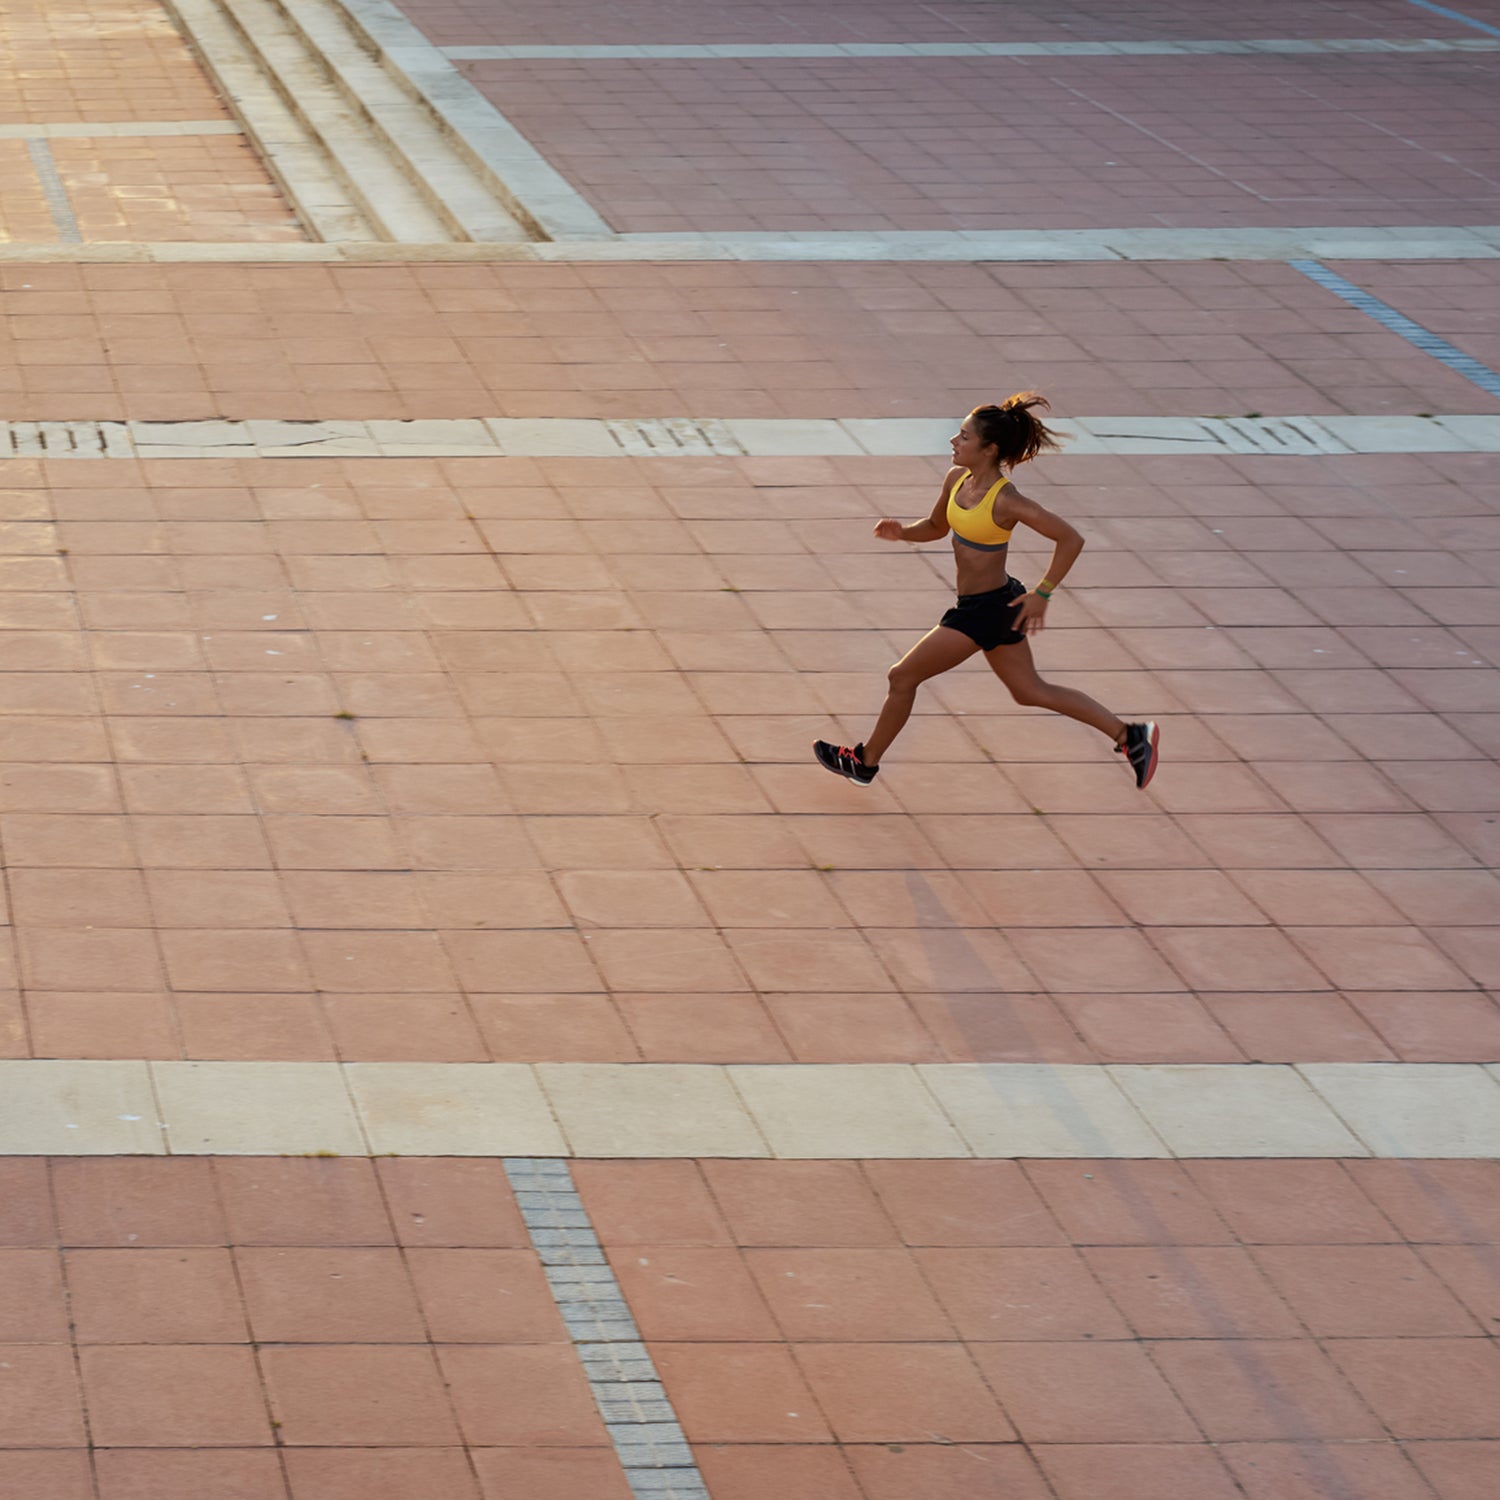 Why Leg Speed Matters for Distance Runners